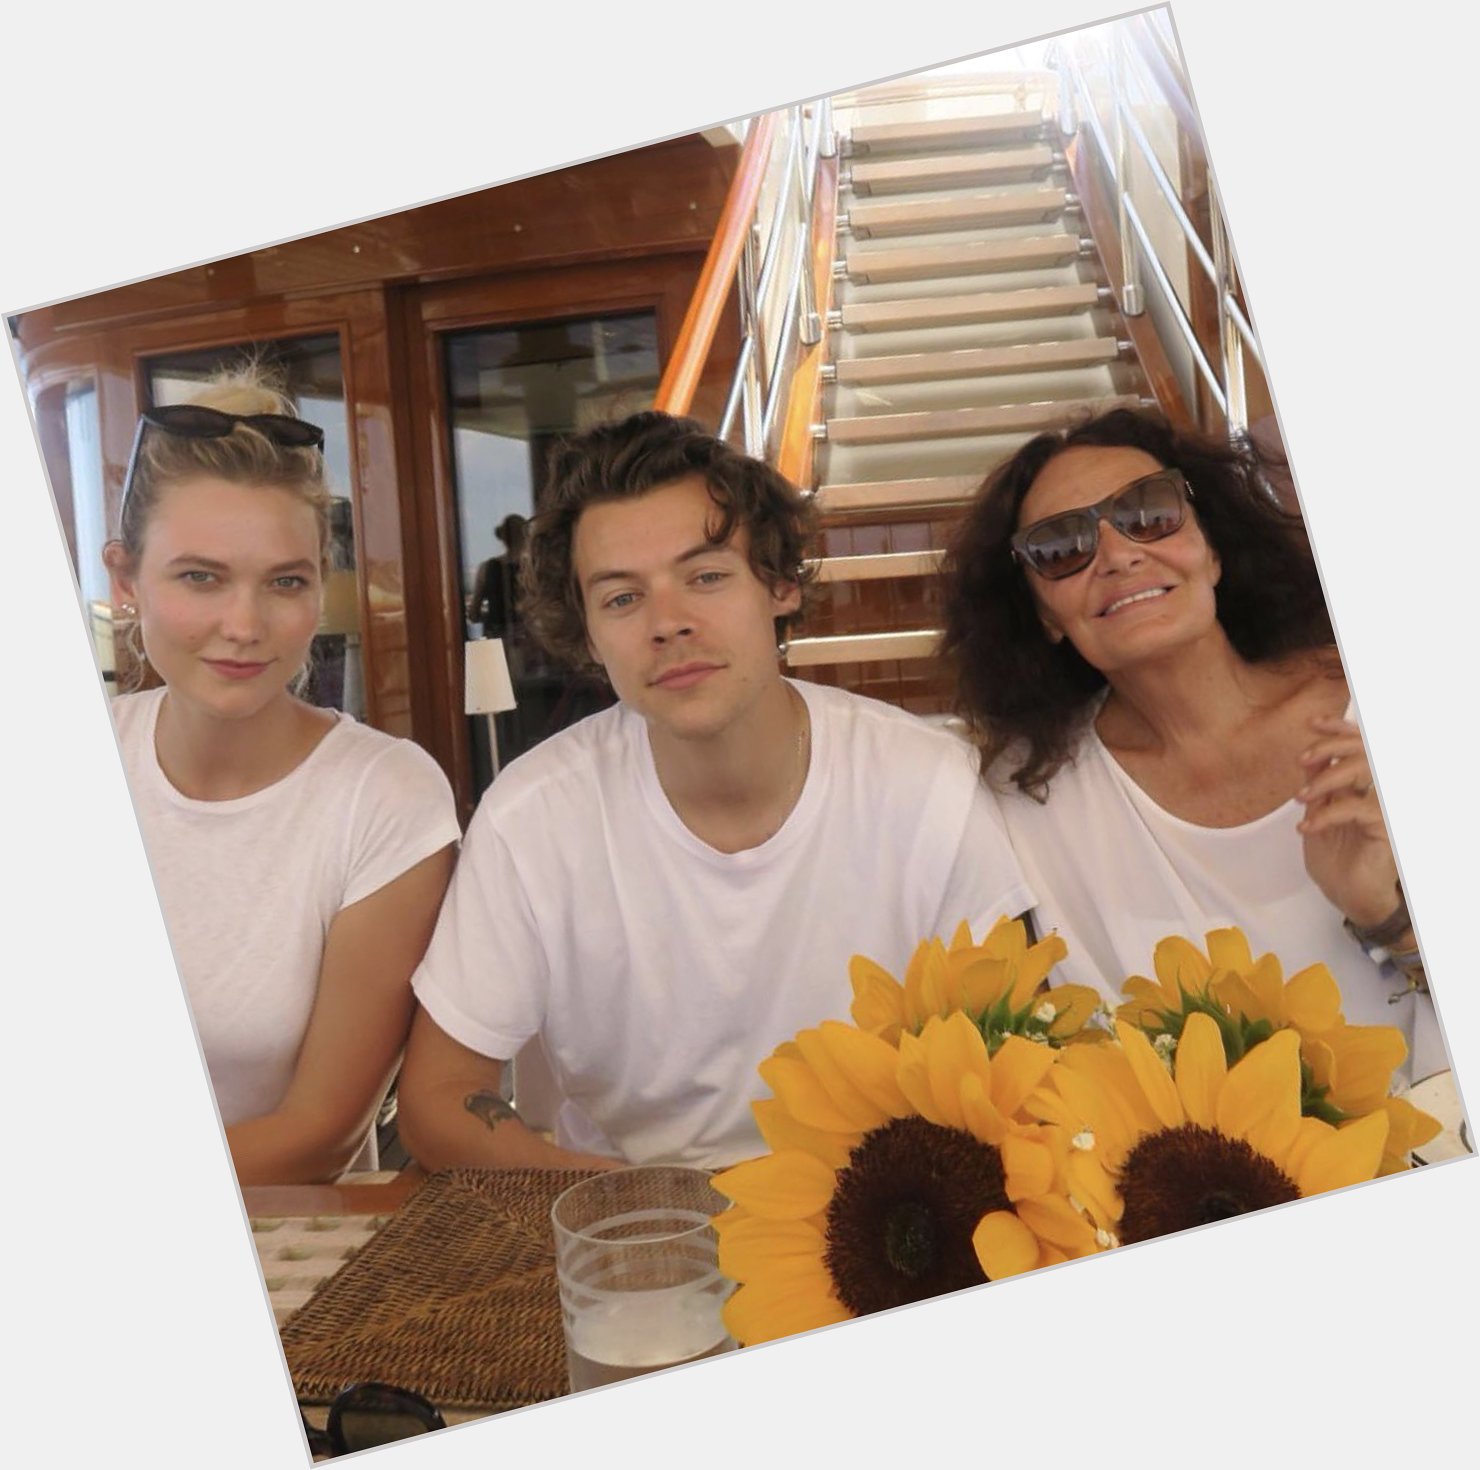 Also harry was hanging out with karlie kloss and dvf recently.. well HAPPY FUCKING BIRTHDAY TO ME 